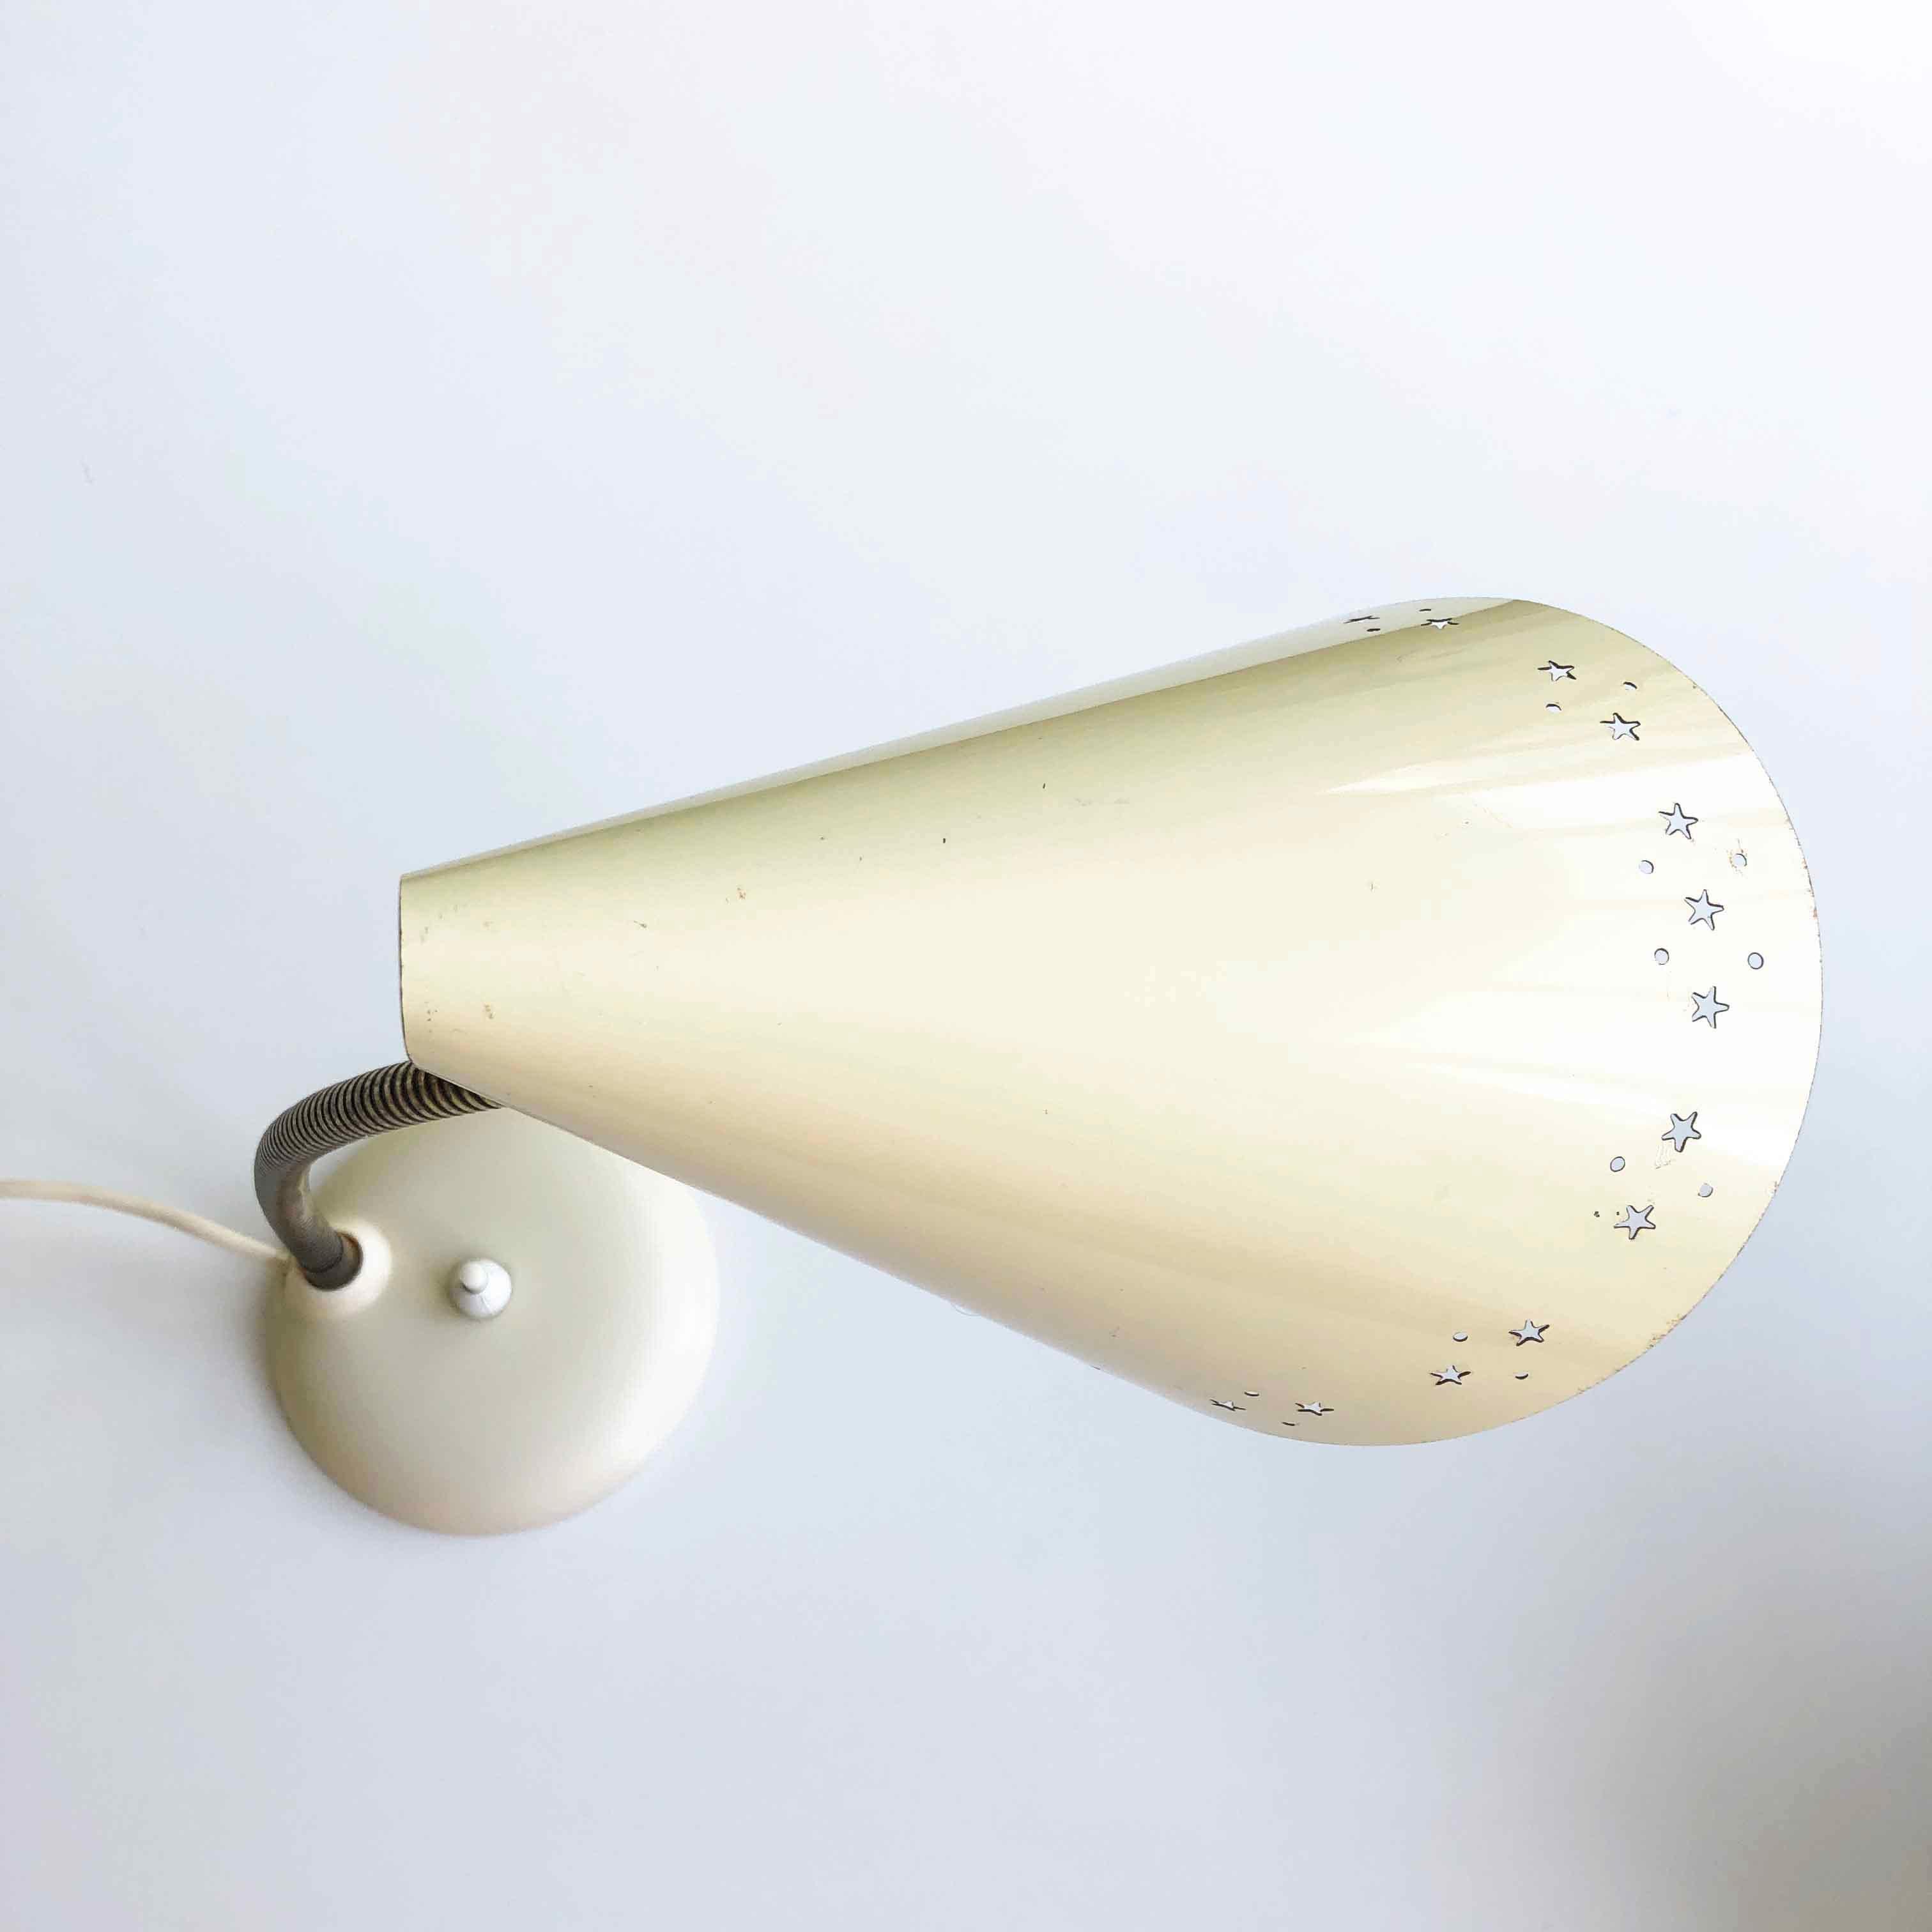 Beautiful star lamp by HoSo Hoffmeister & Sohn from the 1950s.

This desk lamp has a folded conical lampshade in metal. The cream-colored lampshade is perforated all around with stars and round holes. The gooseneck is made of brass and can be